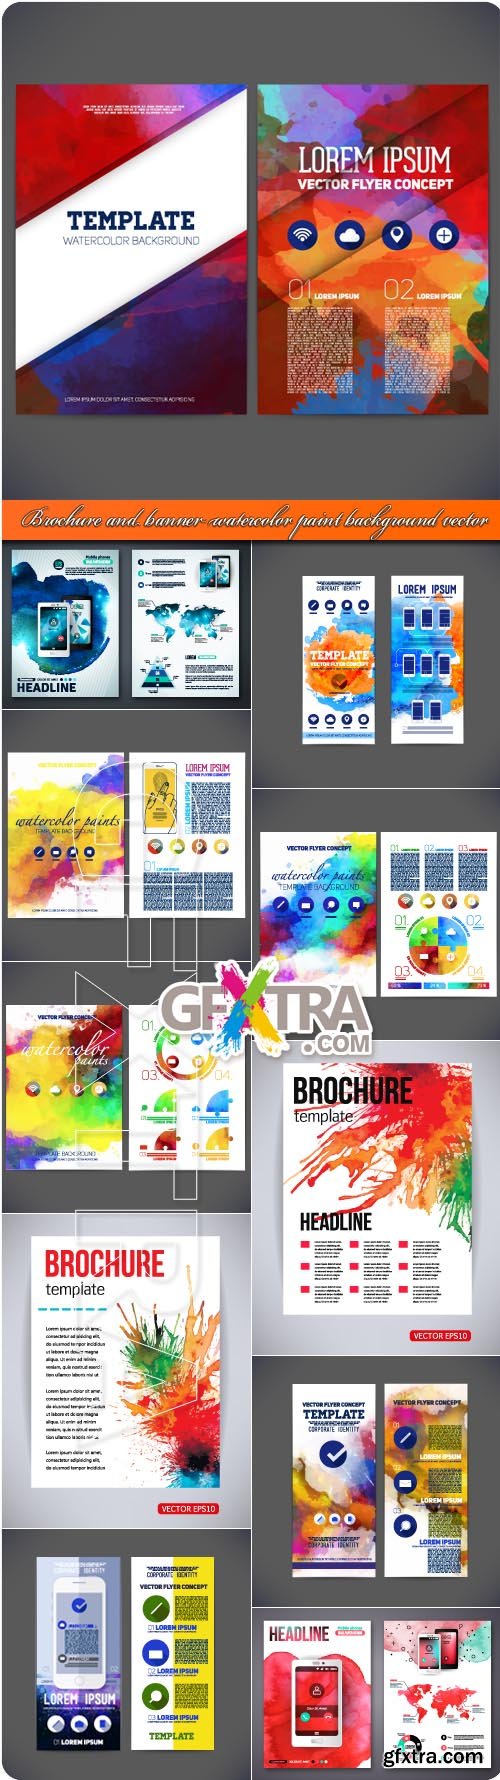 Brochure and banner watercolor paint background vector